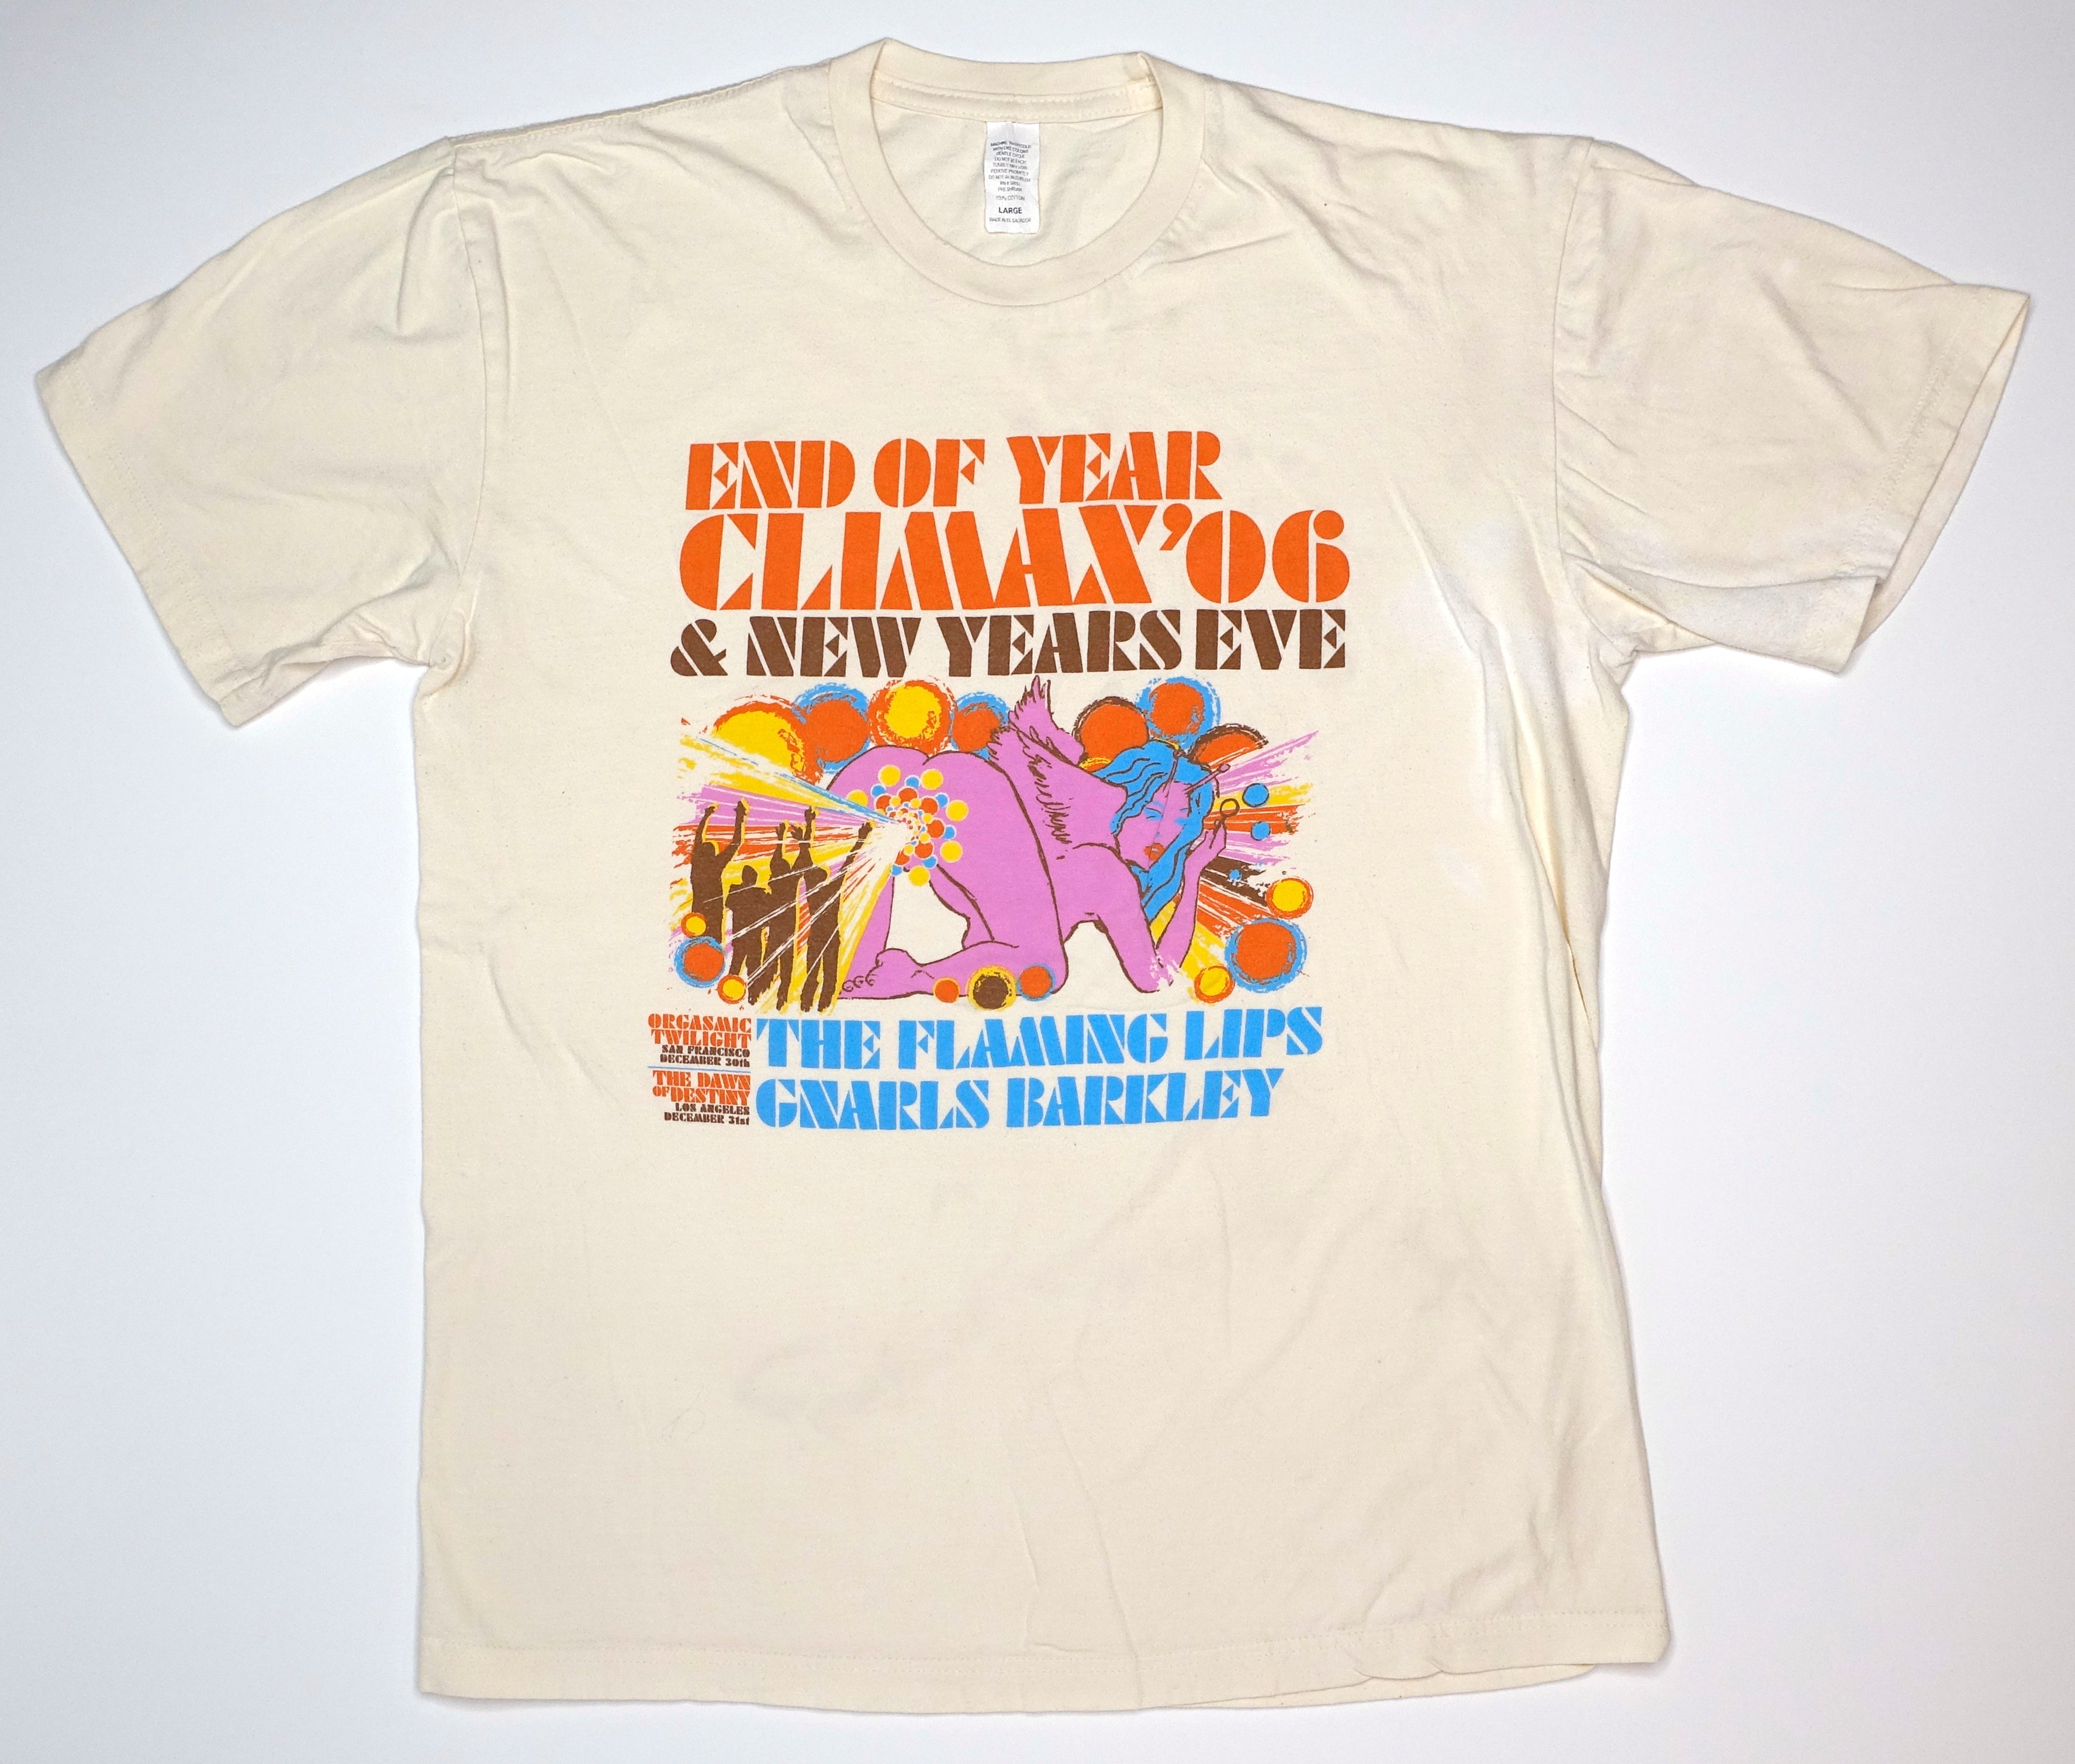 the Flaming Lips / Gnarls Barkley - End of the Year Climax 2006 New Years Eve Tour Shirt Size Large